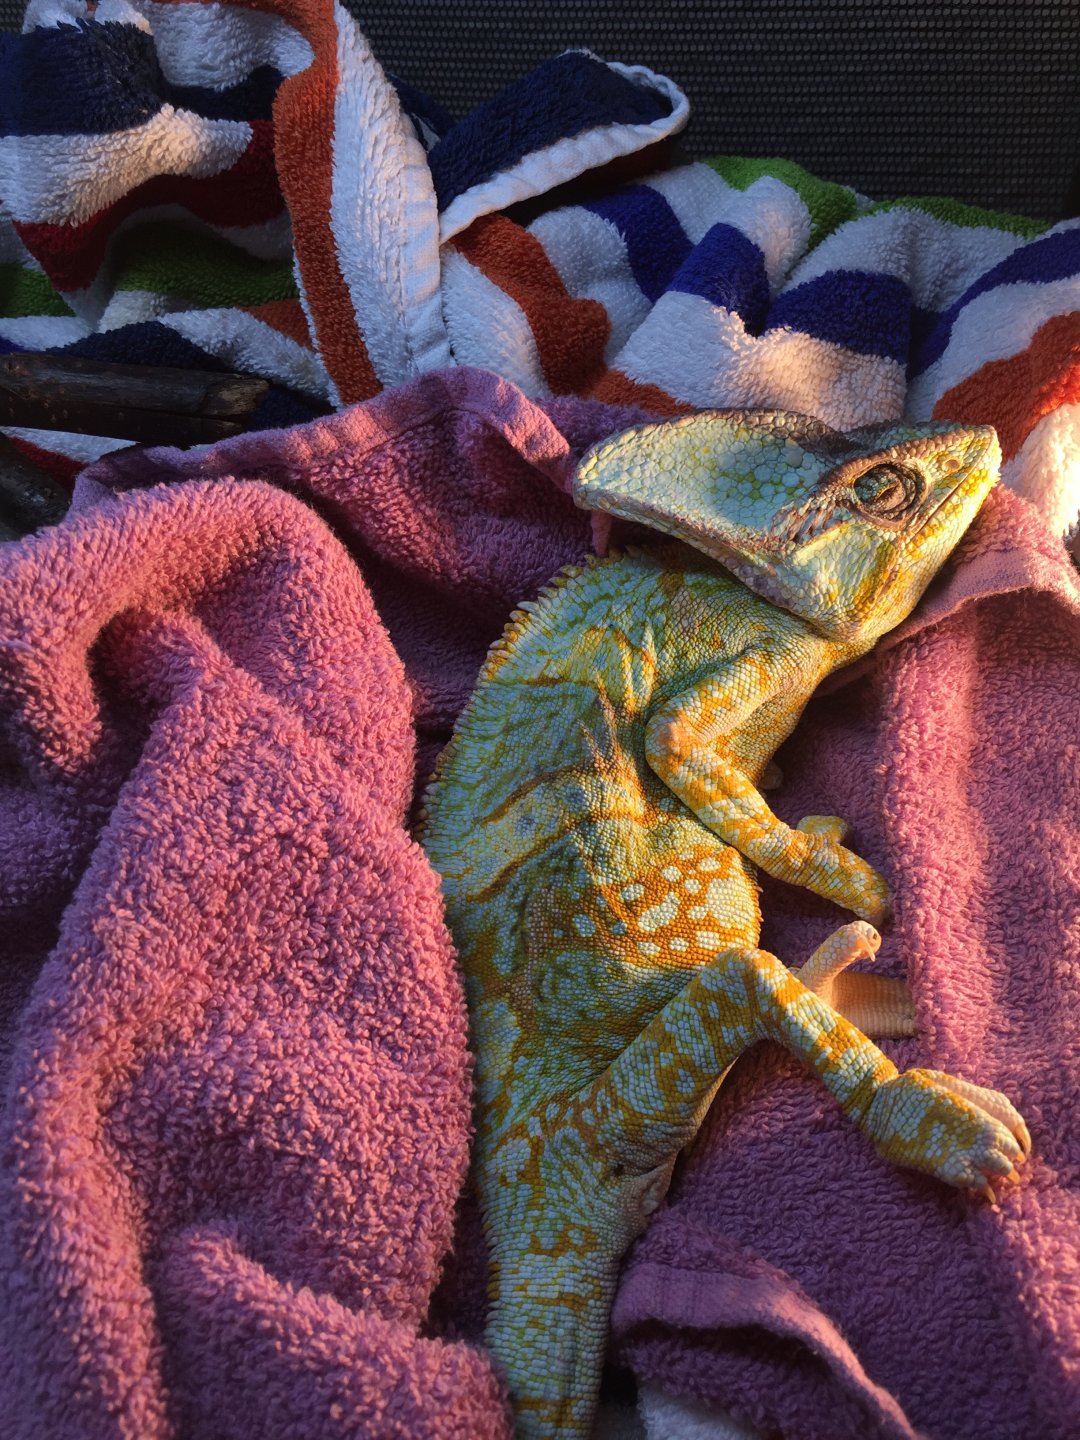 How Do I Know if My Chameleon is Cold?